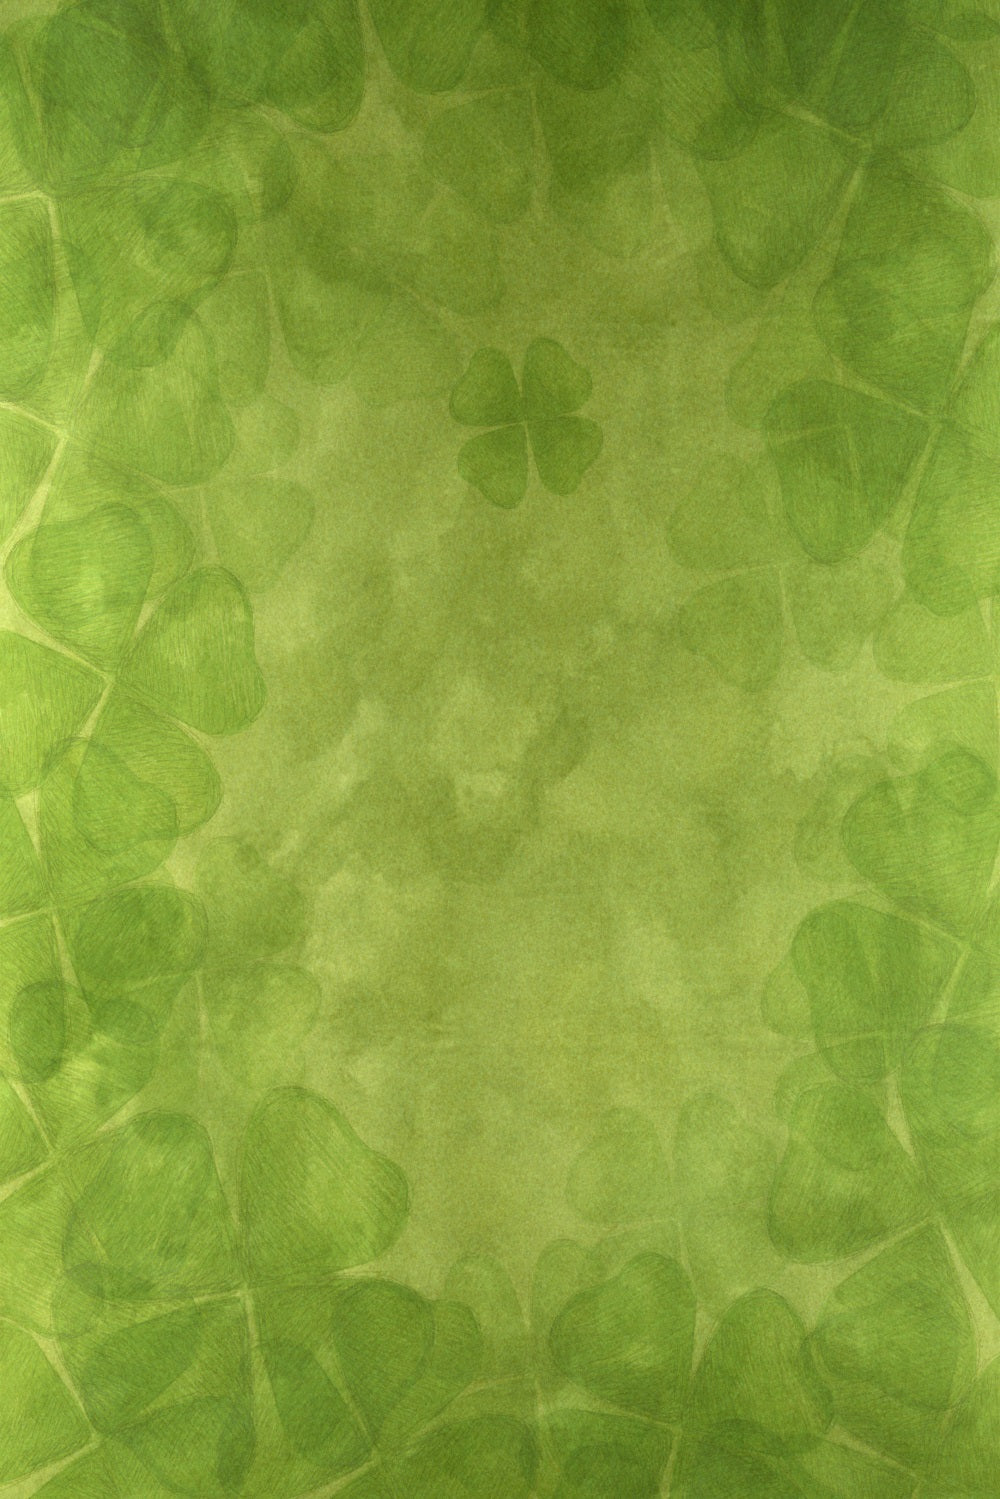 Kate Abstract Texture Backdrop Clover for Photography